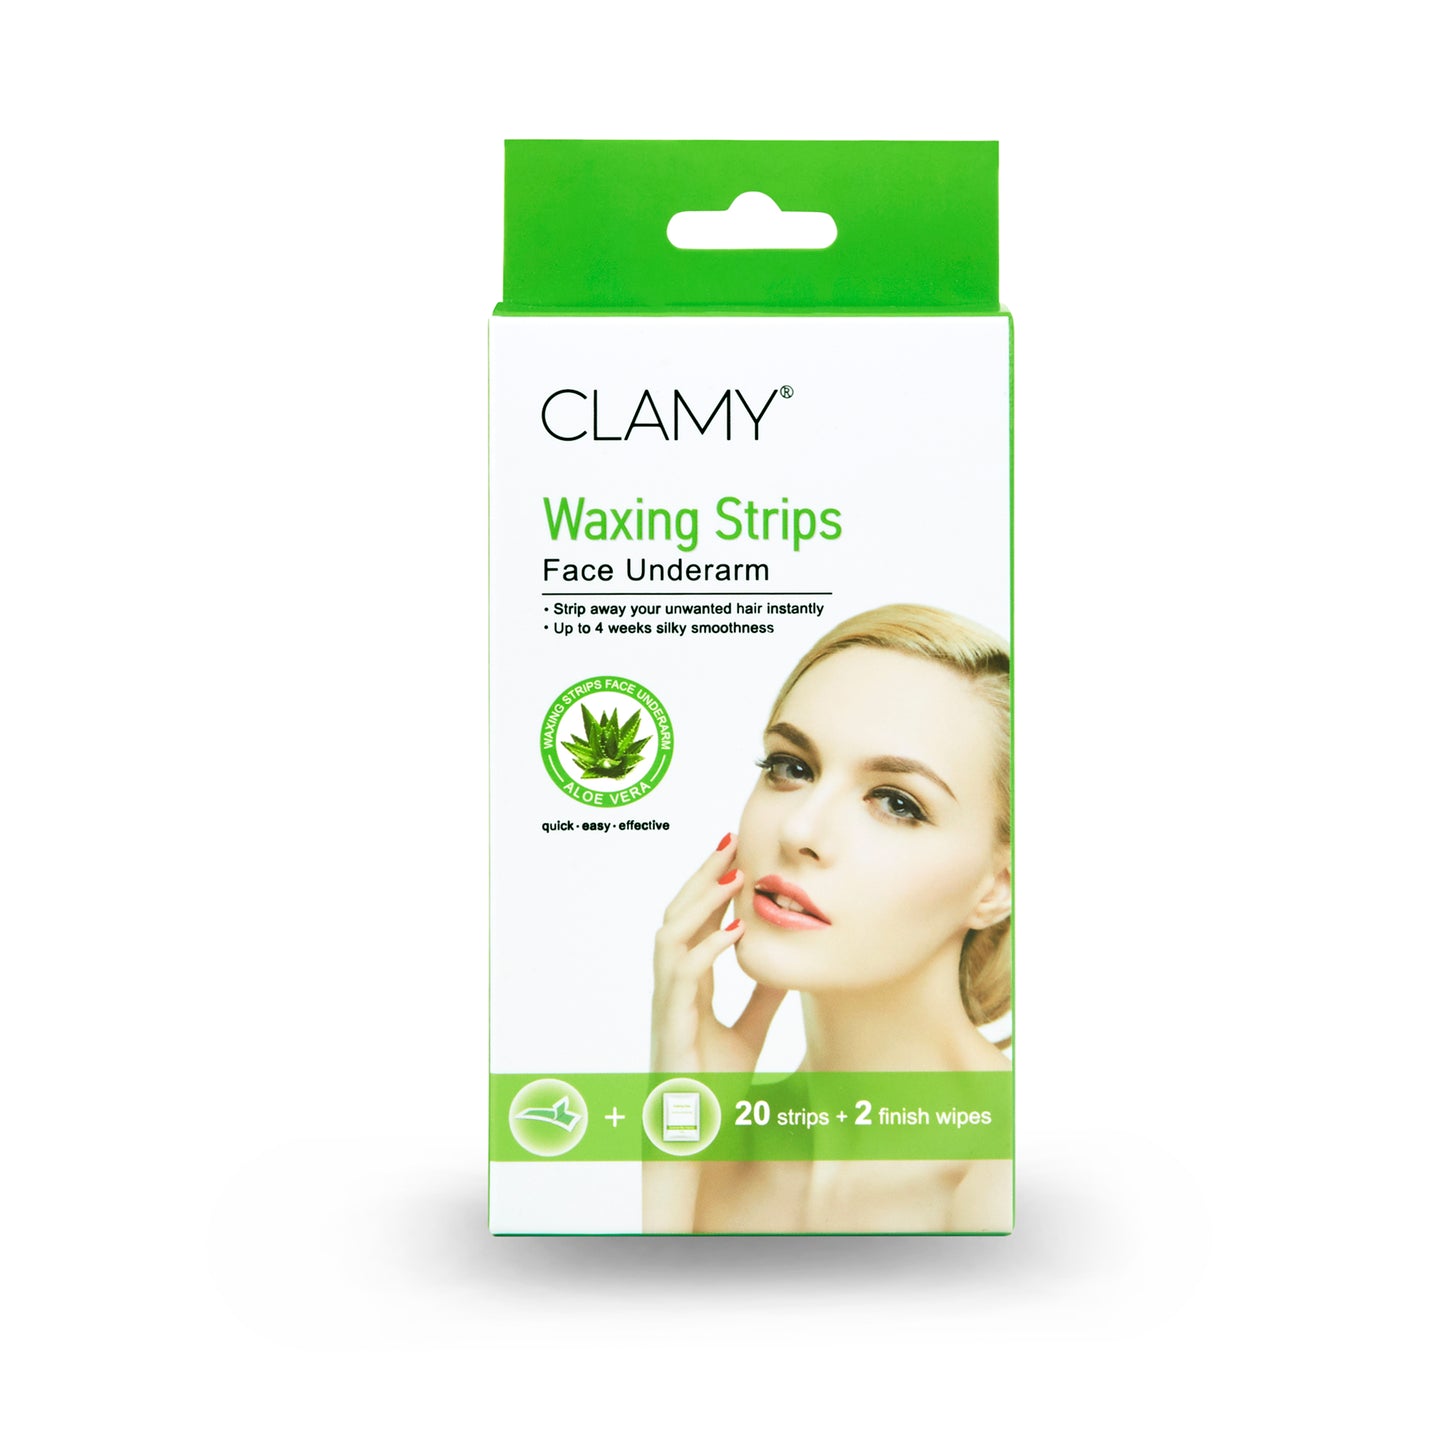 Face & UnderArms Waxing Strips with Natural Extracts Instant Removal Silky Smoothness Up to 4 Weeks (20 Strips + 2 Finish Wipes)